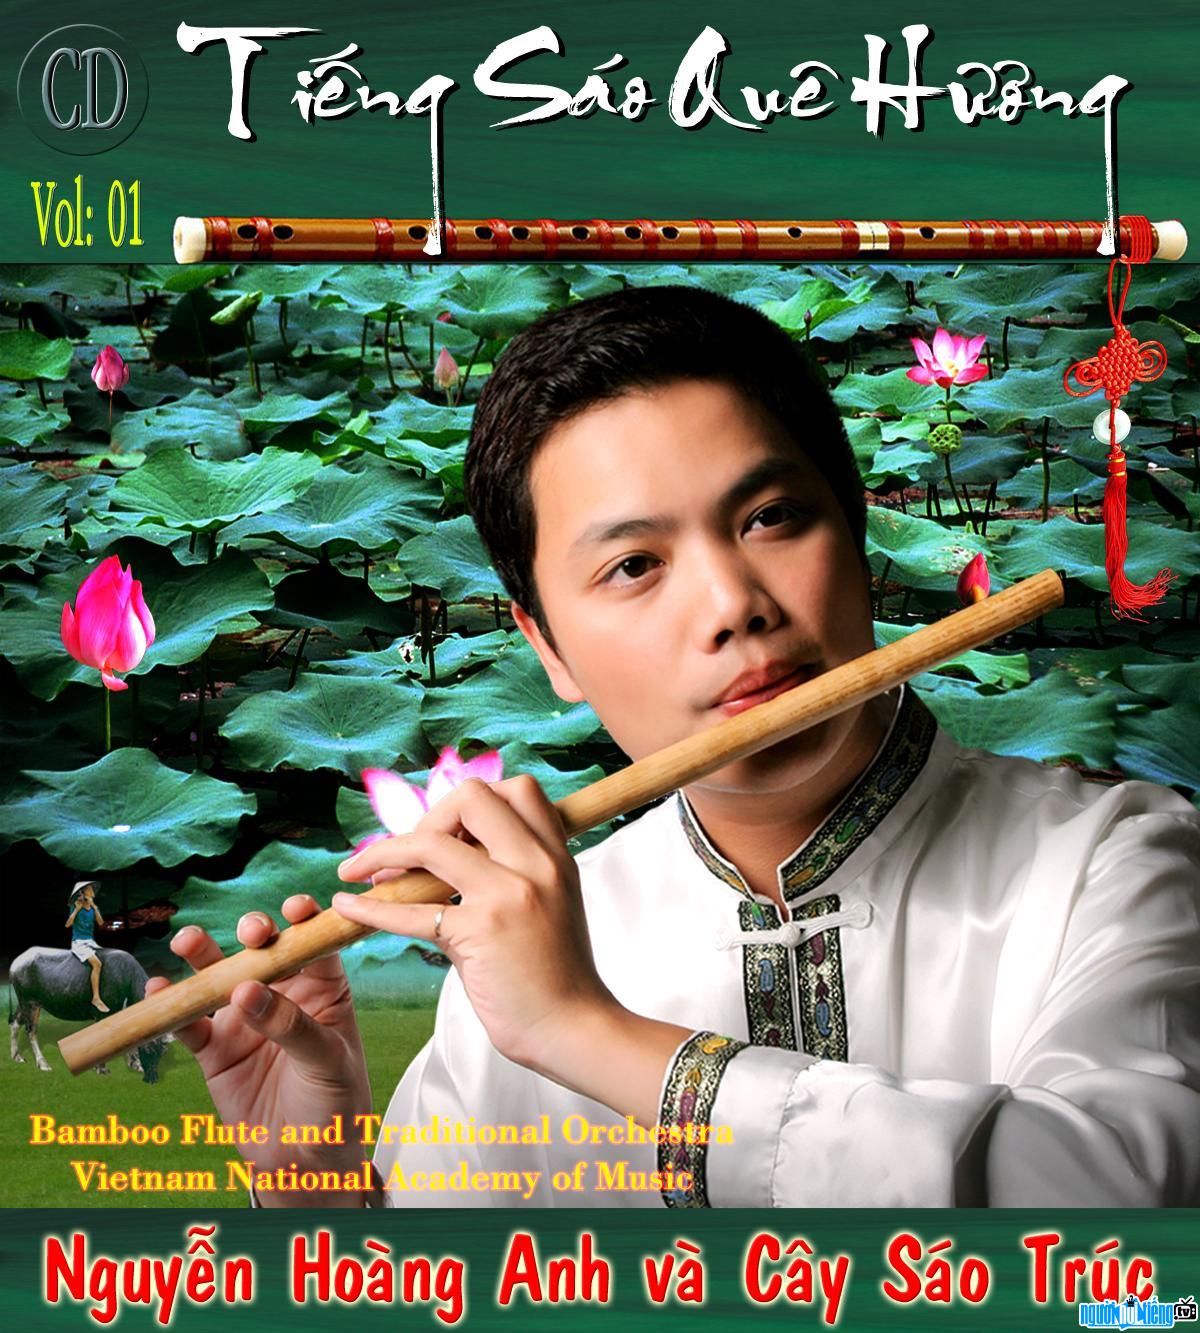  Nguyen Hoang Anh with CD "Homeland flute"